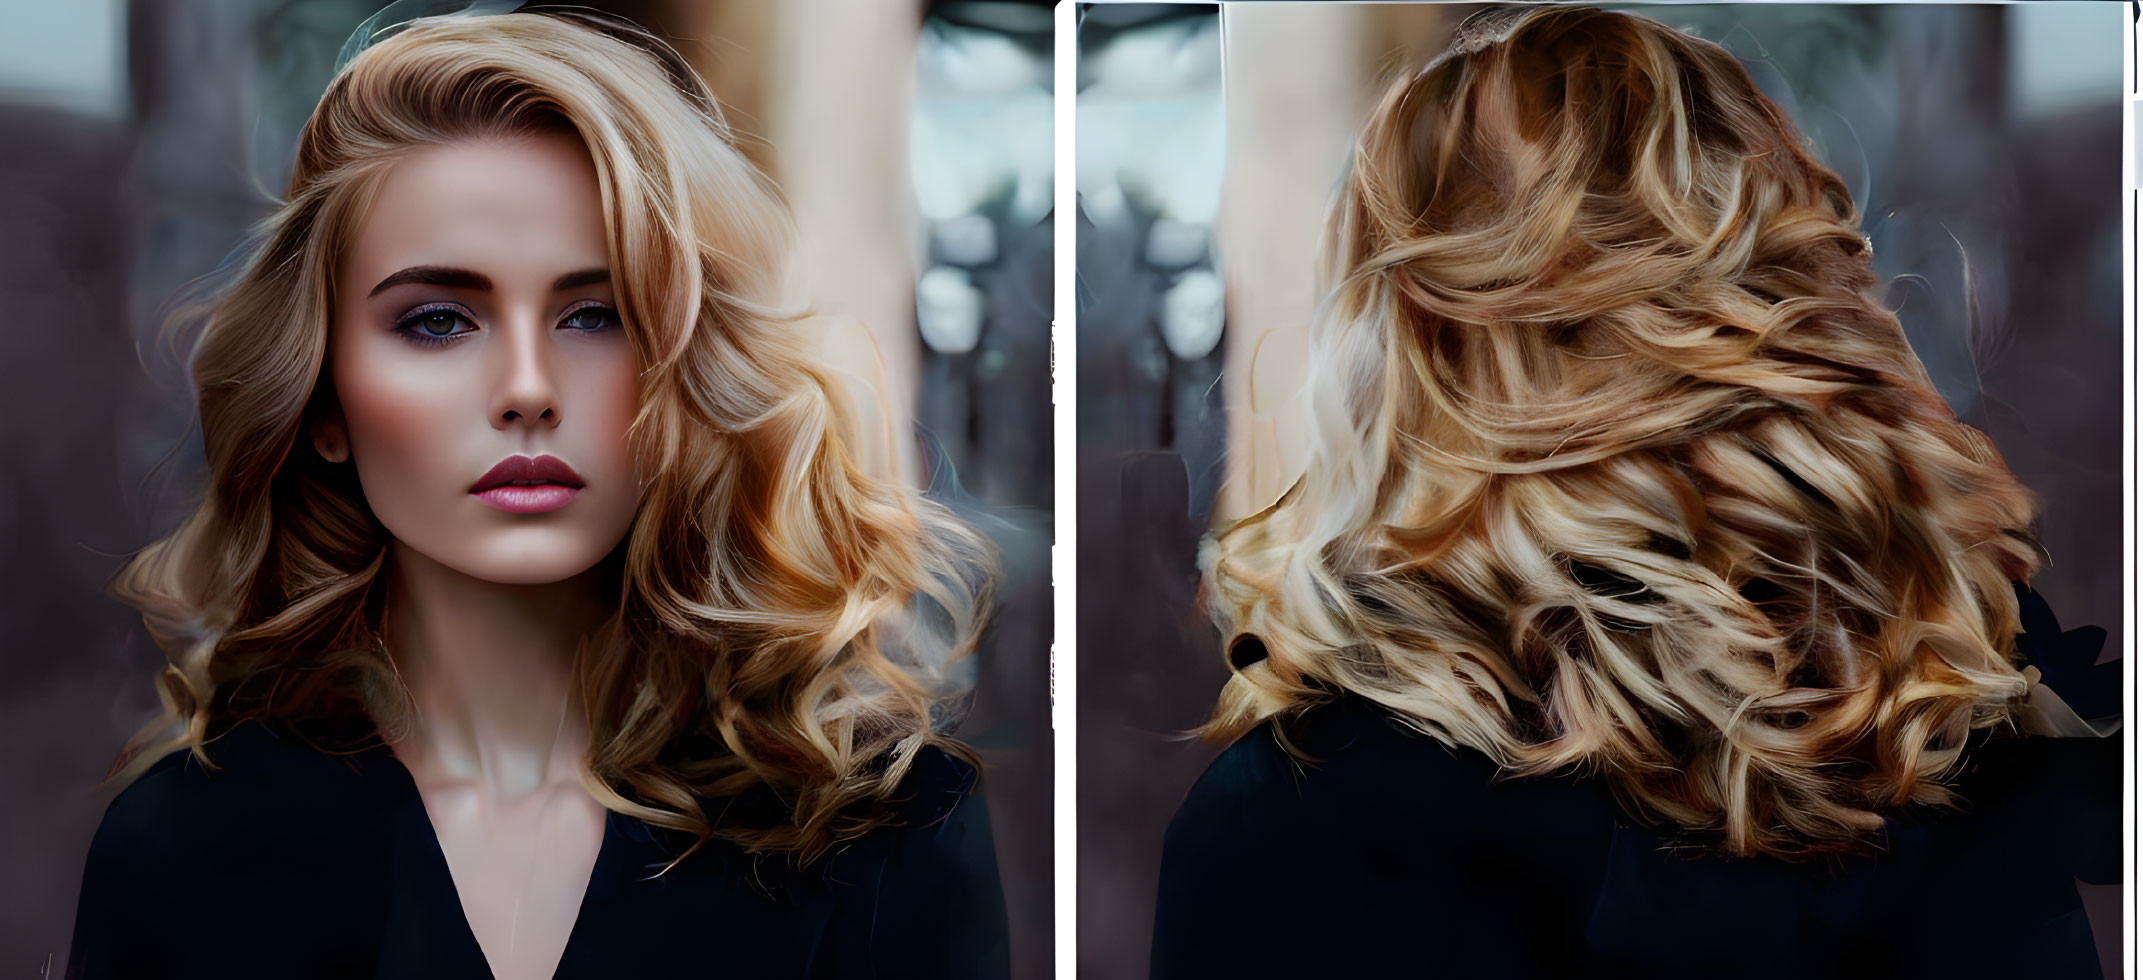 Blonde woman with wavy hair in dark blazer front and back photos